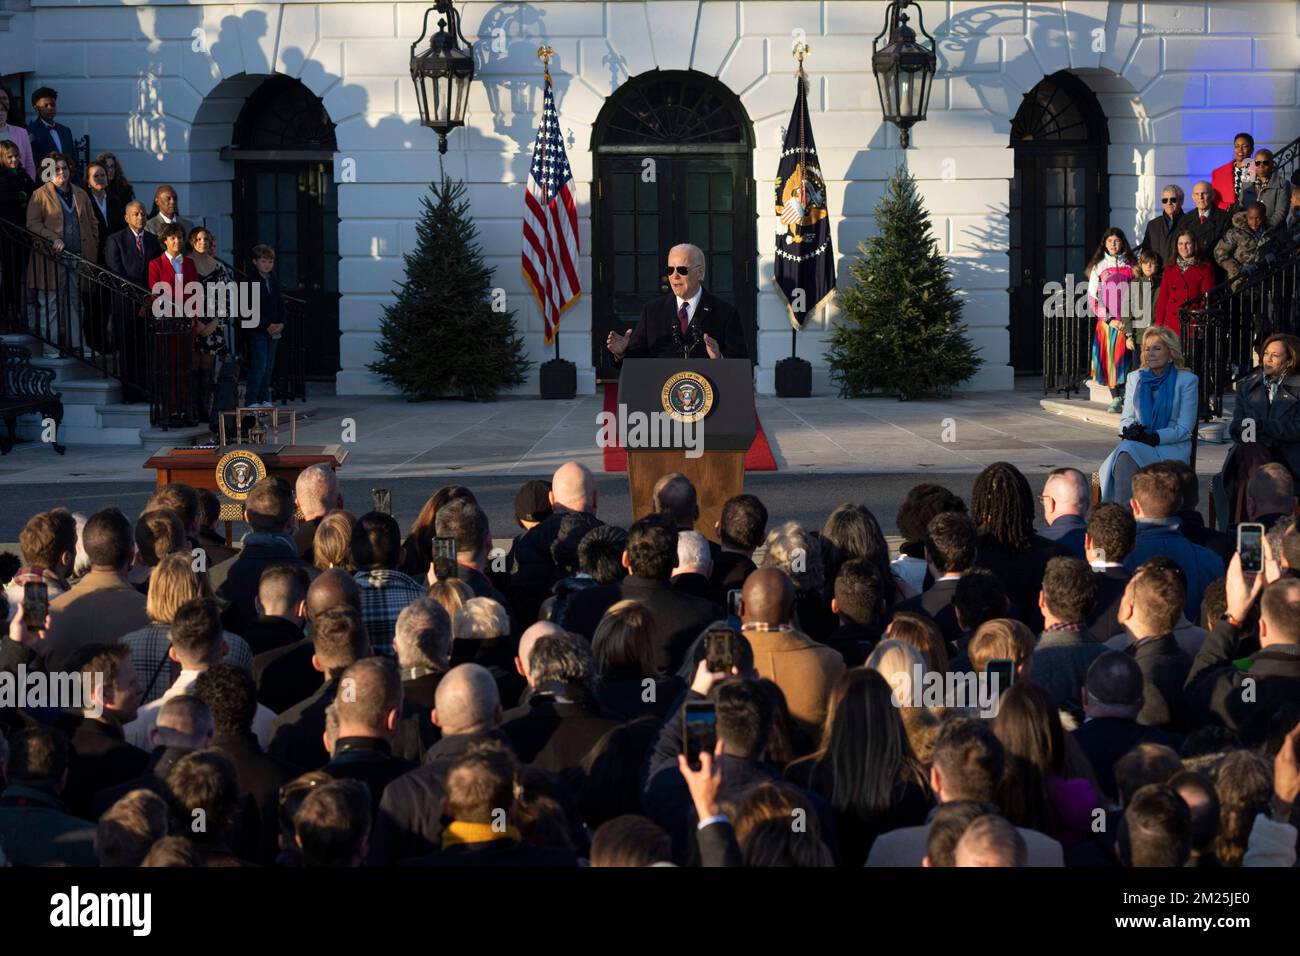 United States President Joe Biden hosts a ceremony to sign the Respect for Marriage Act on the South Lawn of the White House in Washington, DC on Tuesday, December 13, 2022. Credit: Chris Kleponis / Pool via CNP Stock Photo